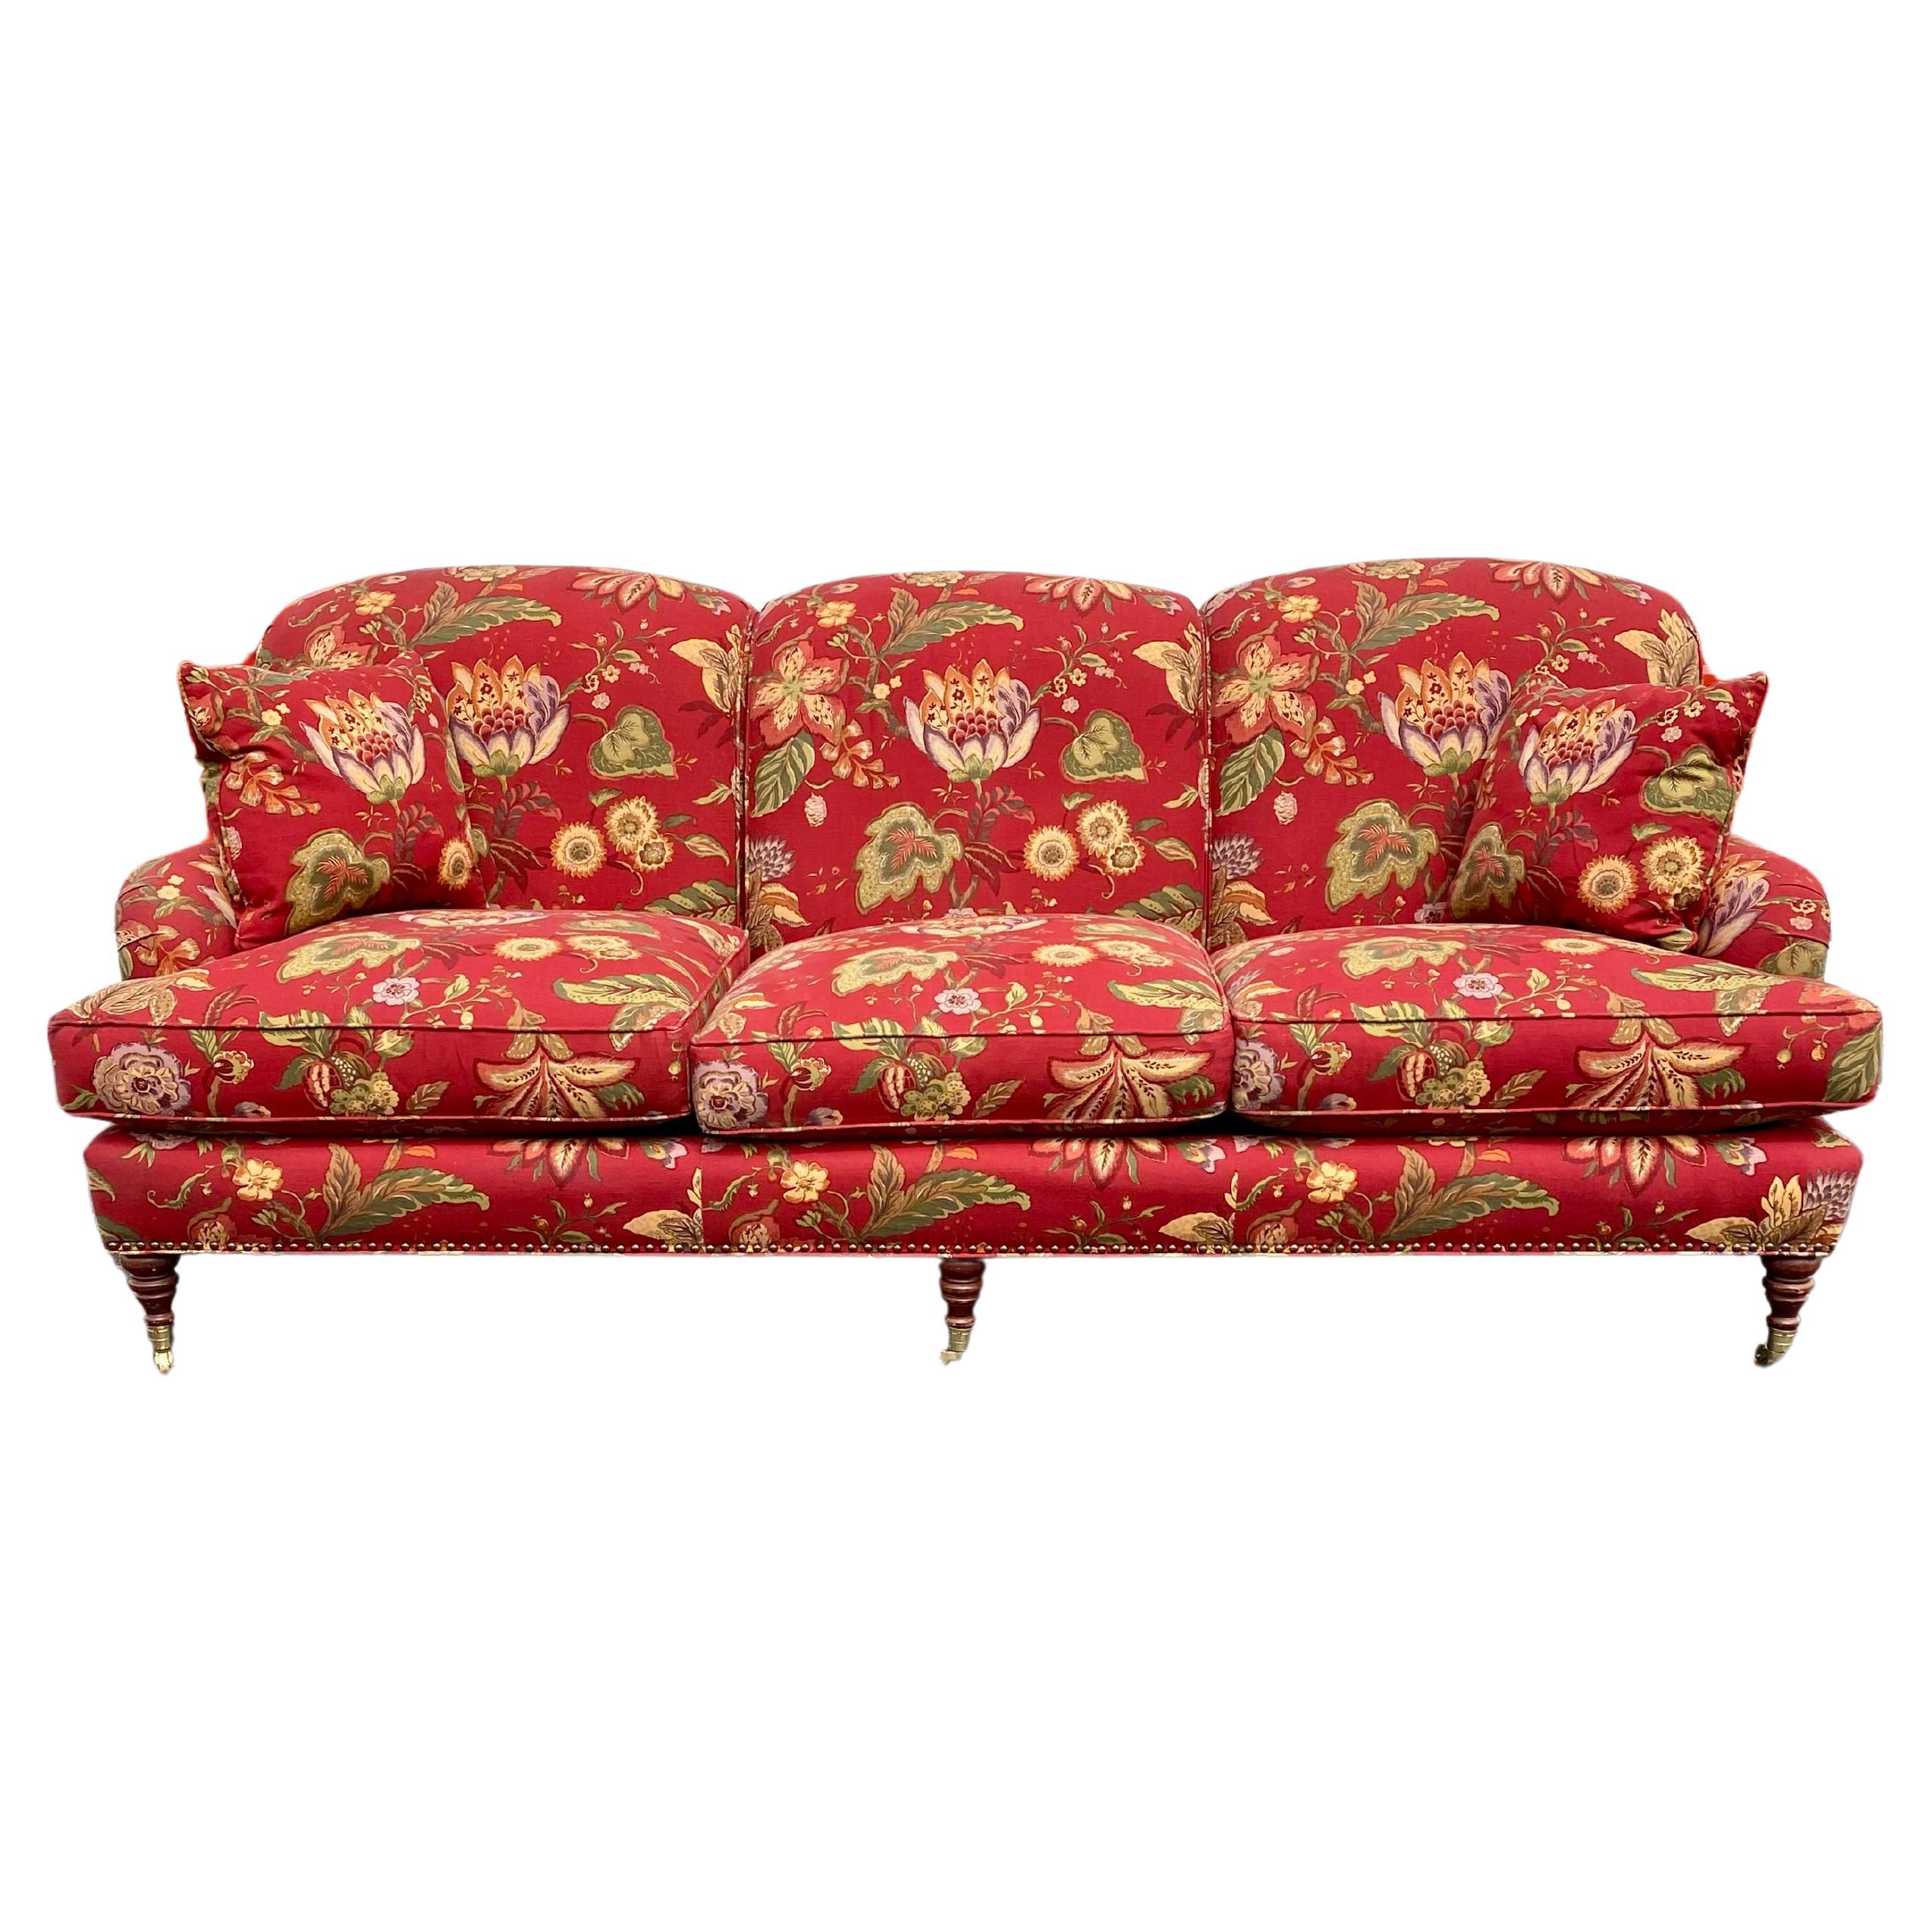 1980s Attributed to George Smith Chintz Floral Linen English Sofa For Sale